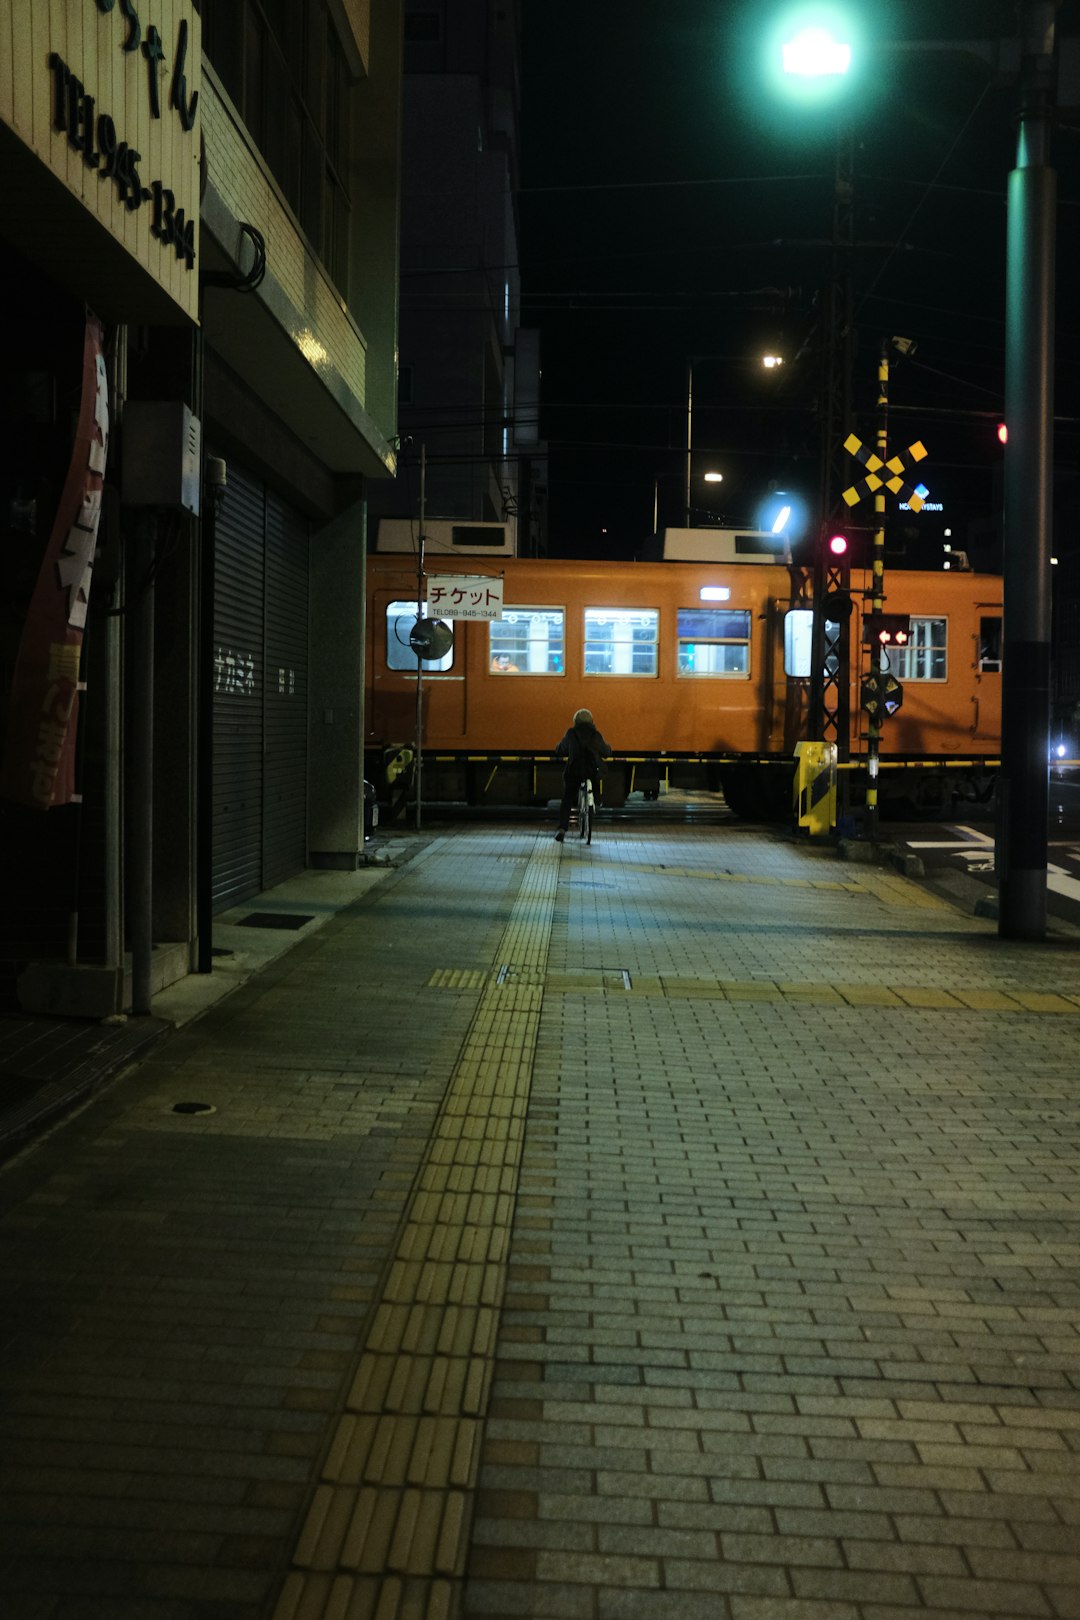 brown and white train on the street during night time